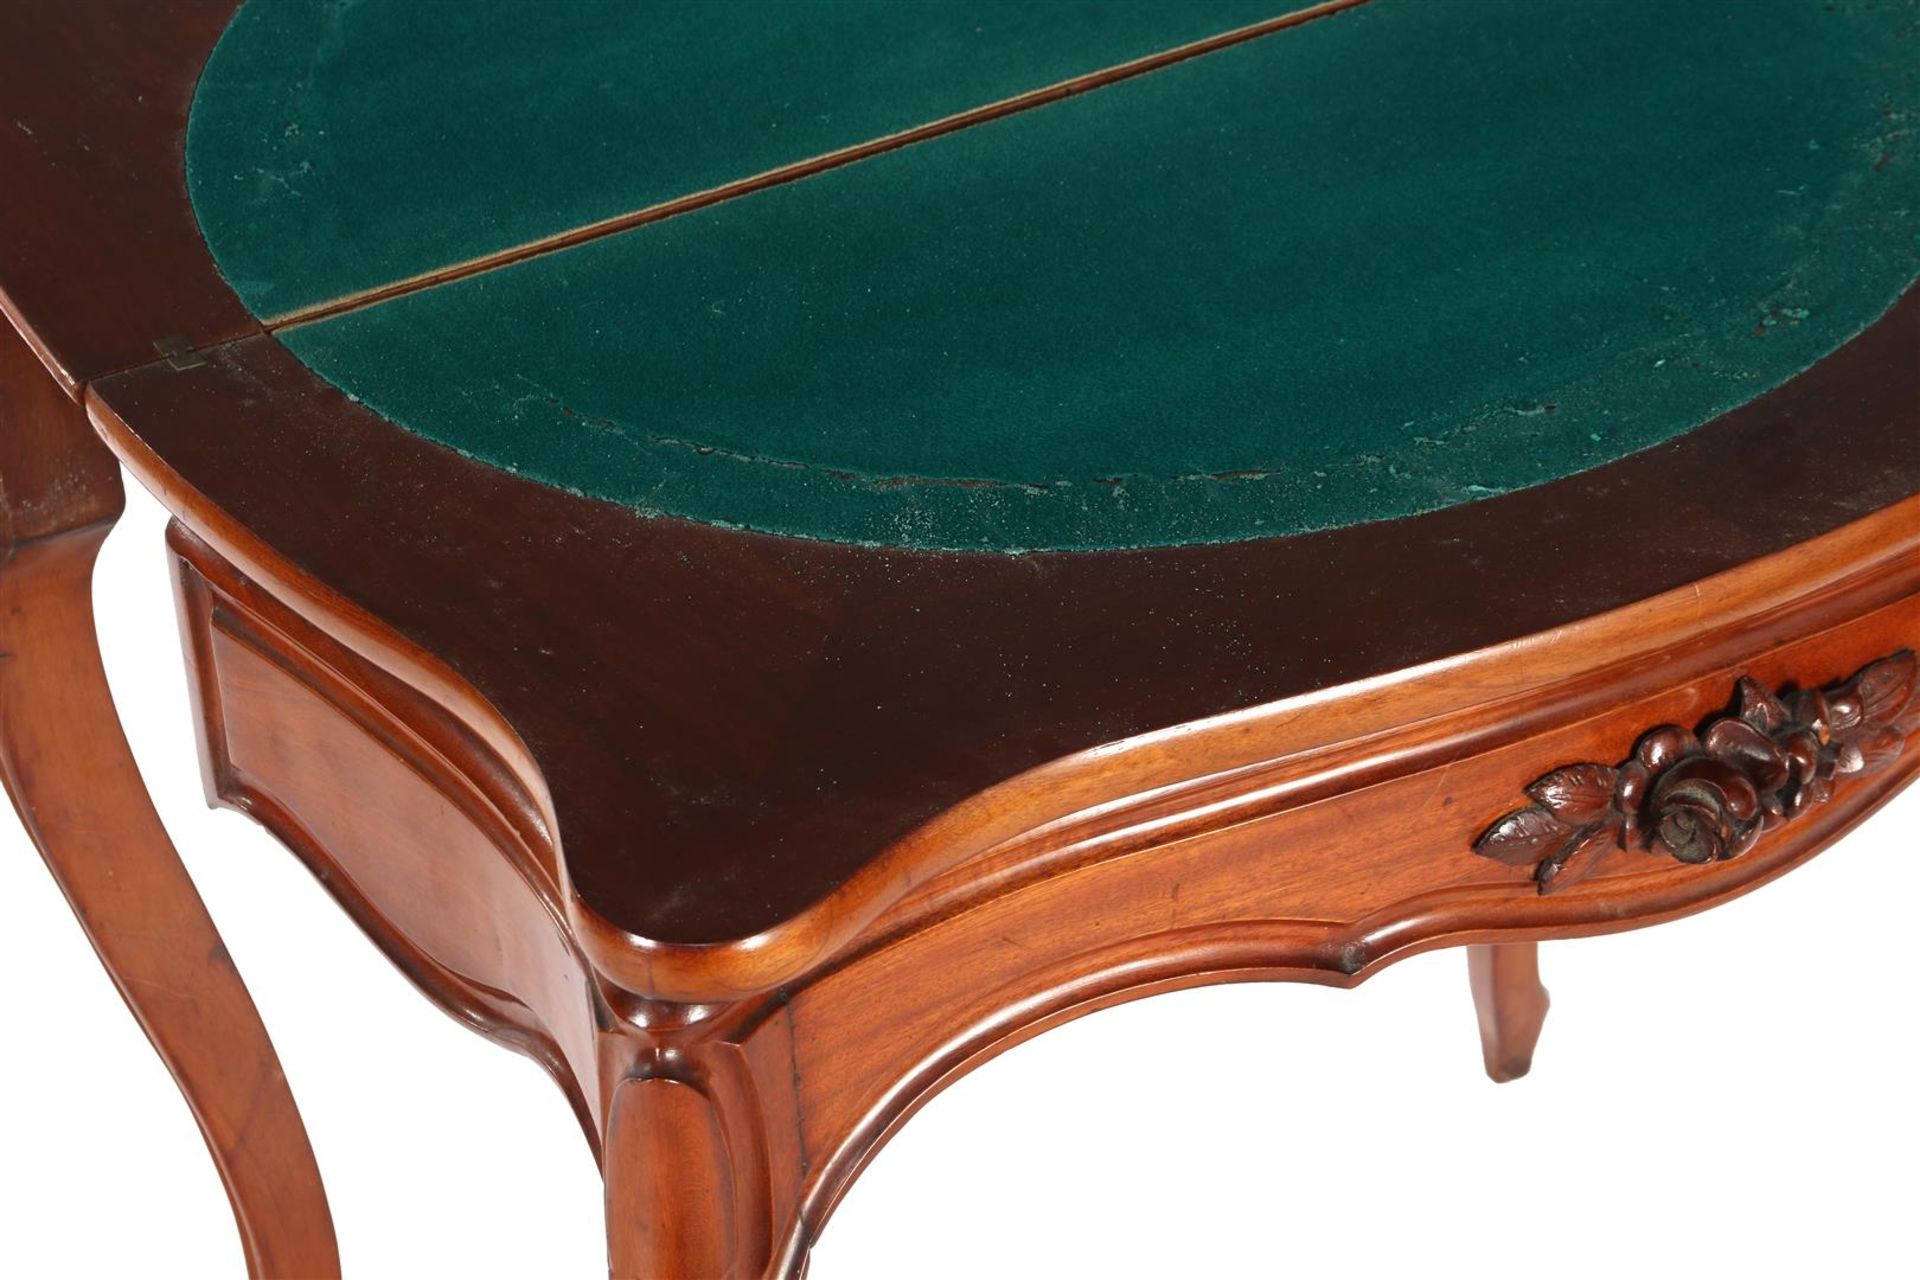 Walt gaming table with green felt and standing on convertible legs - Image 3 of 3